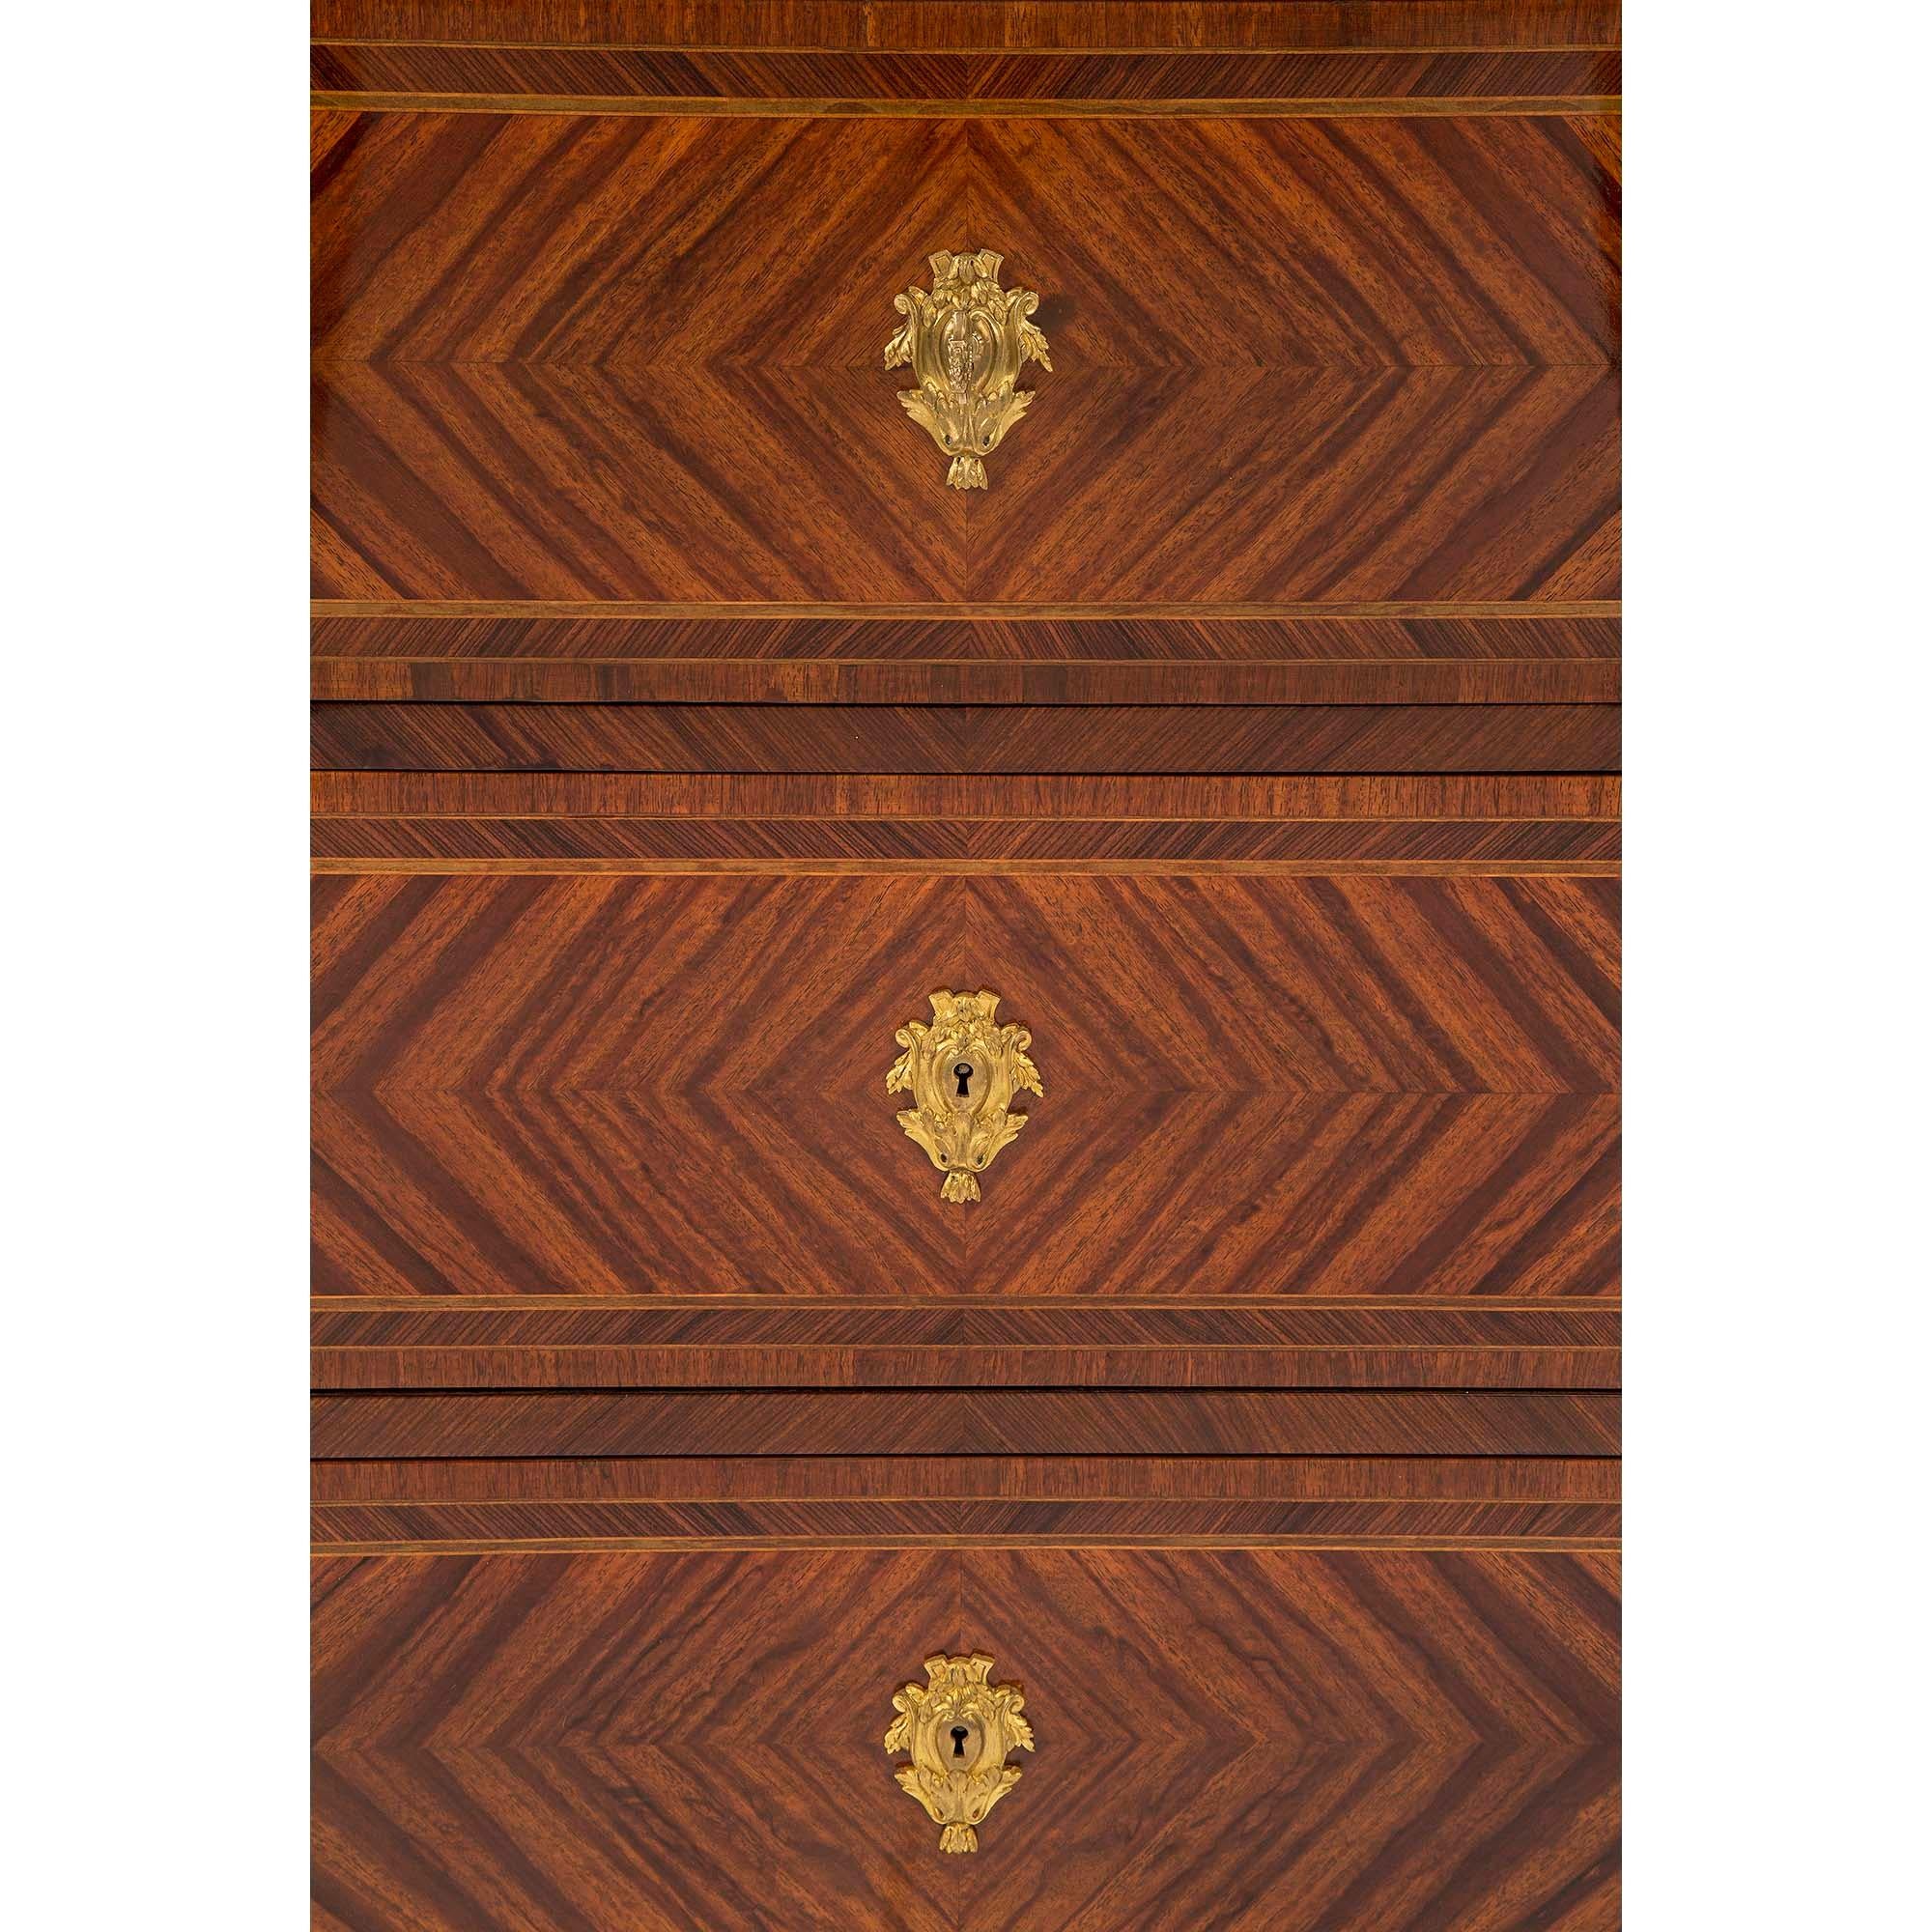 French 19th Century Louis XVI Style Kingwood, Tulipwood and Ormolu Buffet For Sale 3